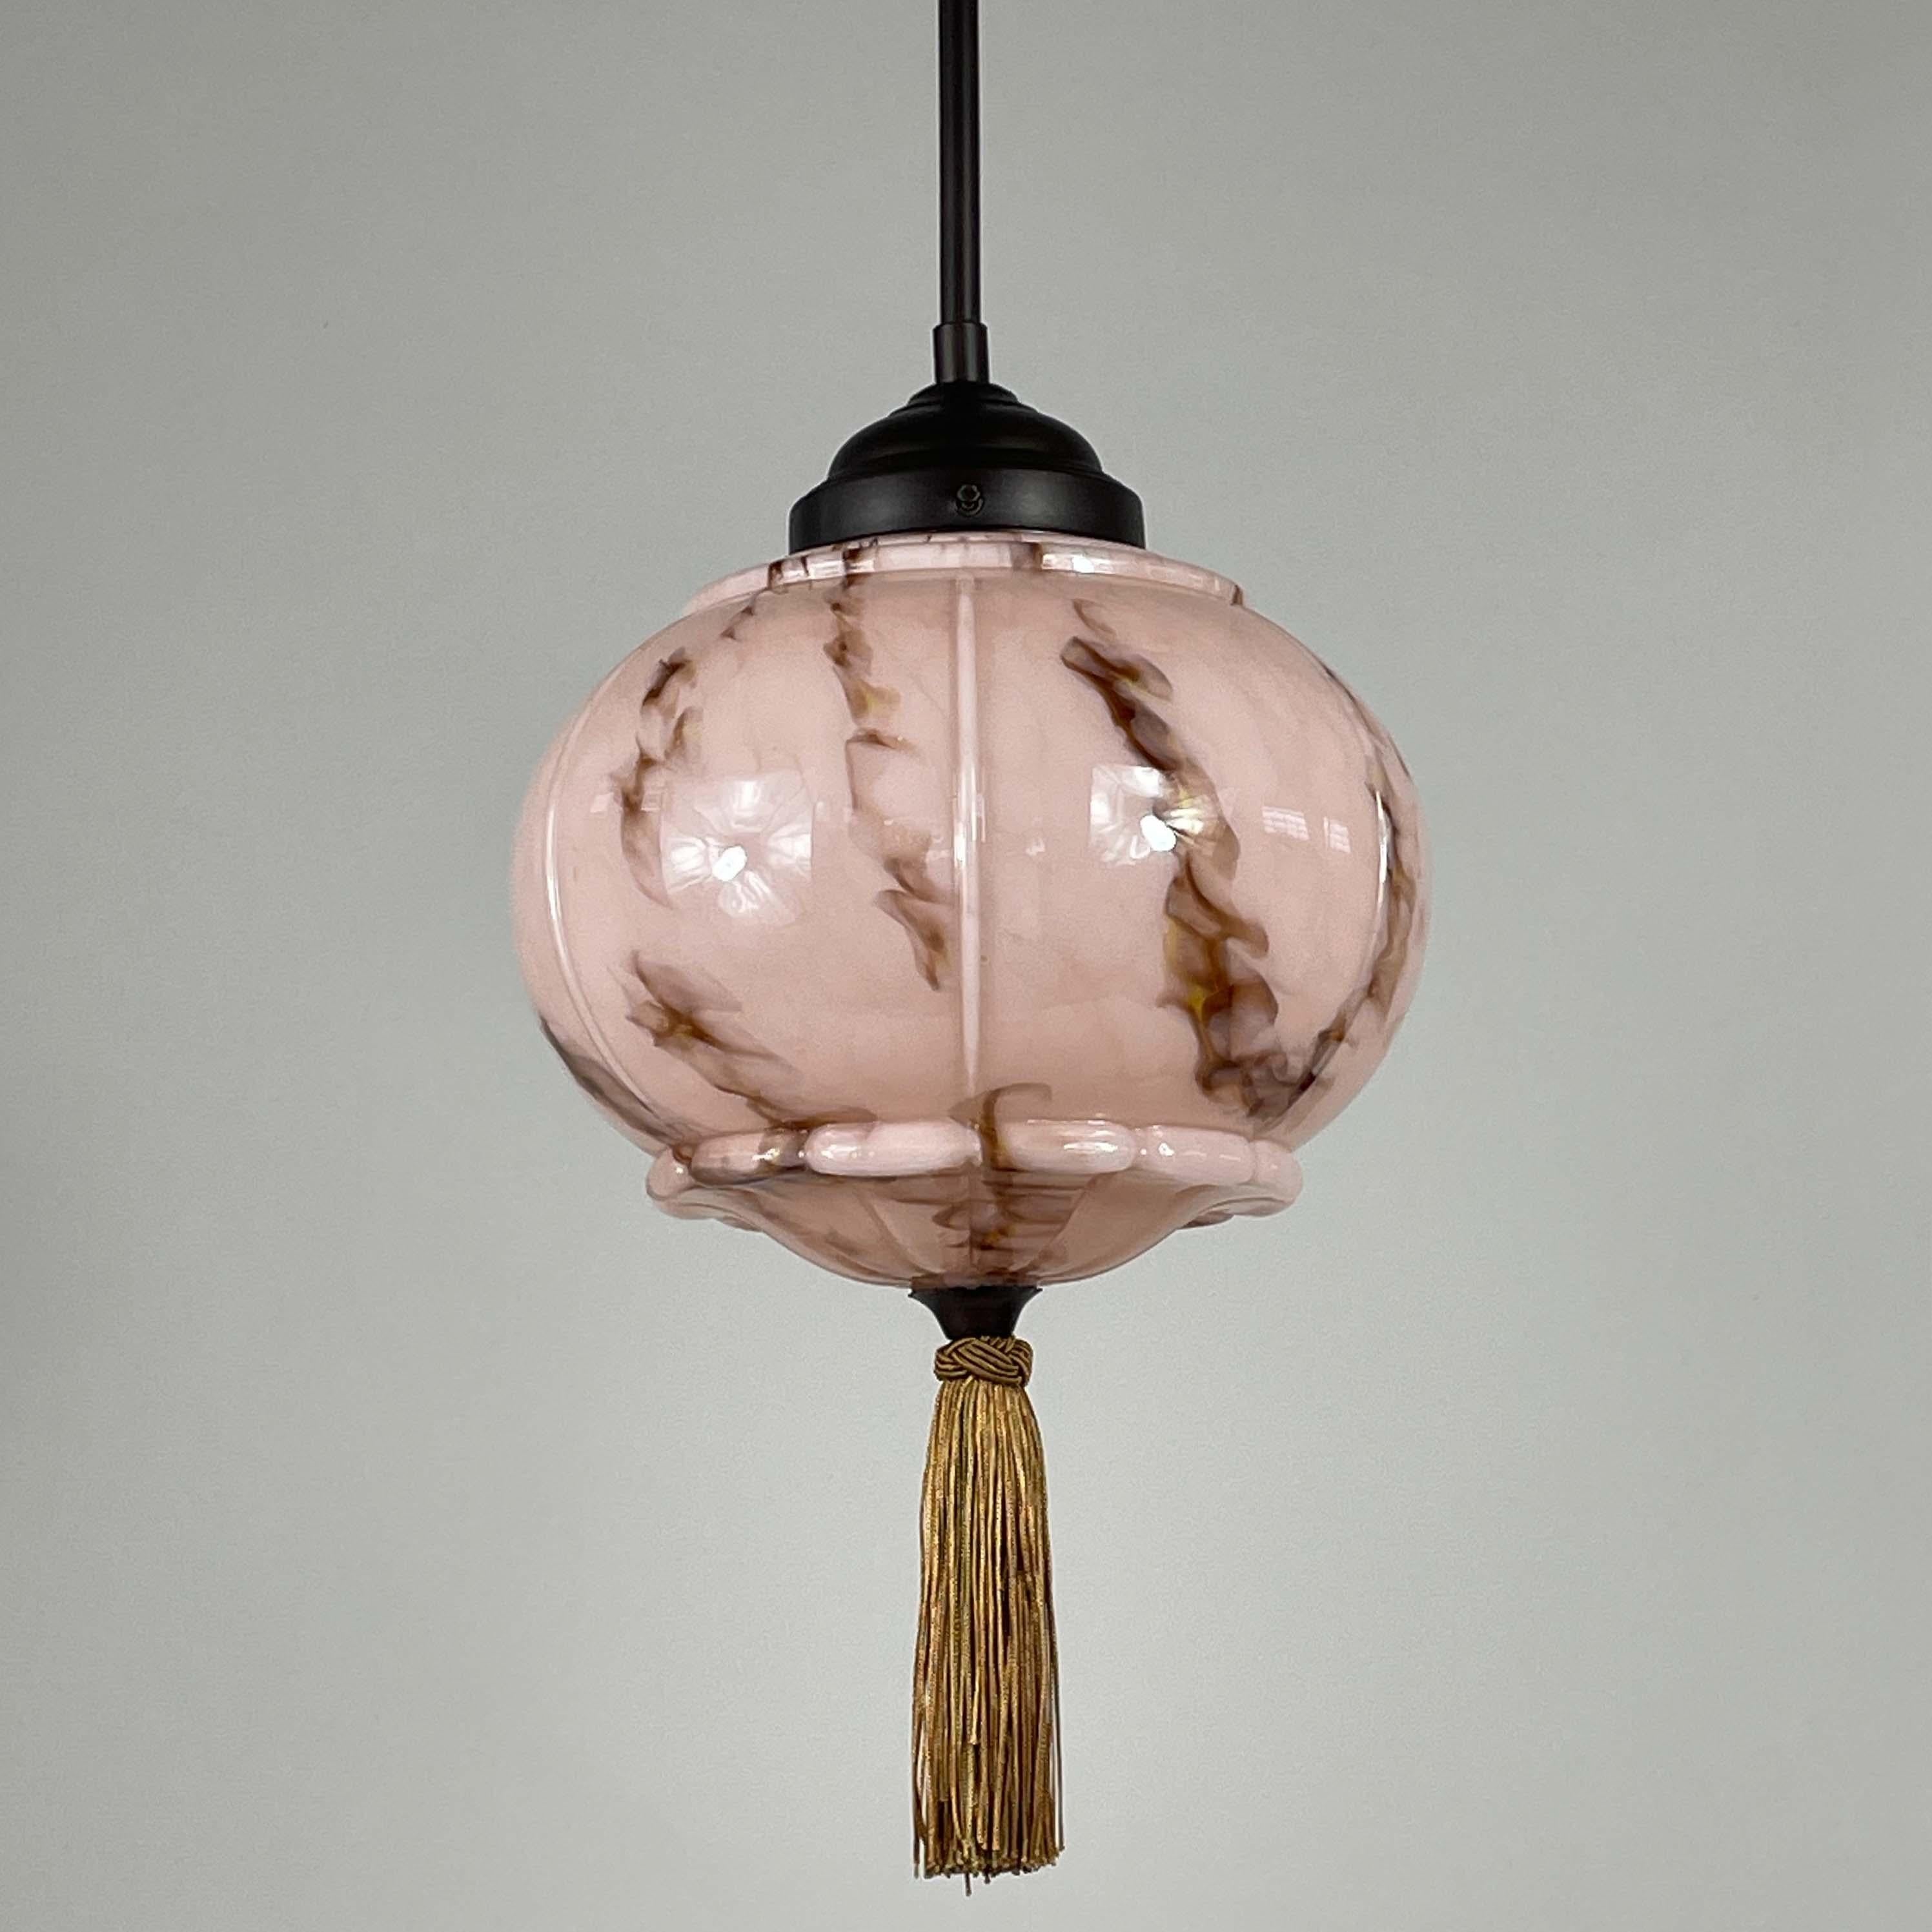 This elegant pendant was designed and manufactured in Germany during the Bauhaus Period in the 1920s to 1930s.

It features a pale rose colored opaline glass lampshade with brown and beige marbled decor, bronzed / burnished metal hardware and silk